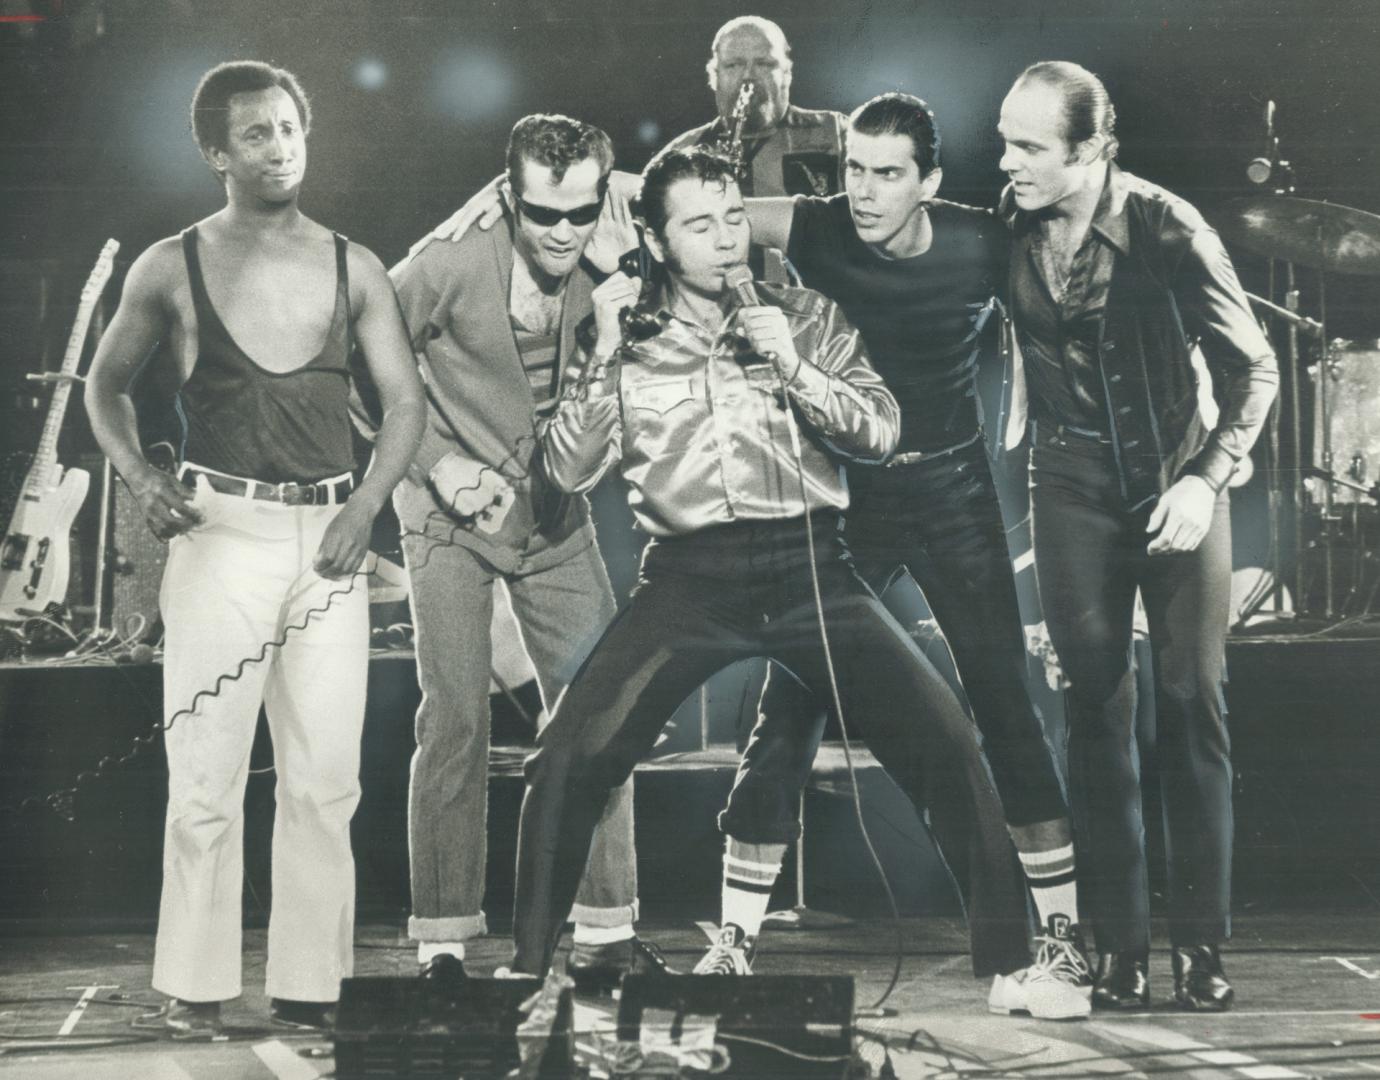 The American rock 'n' roll revival show, Sha Na Na last night gave 14,000 folks a good time at the Forum